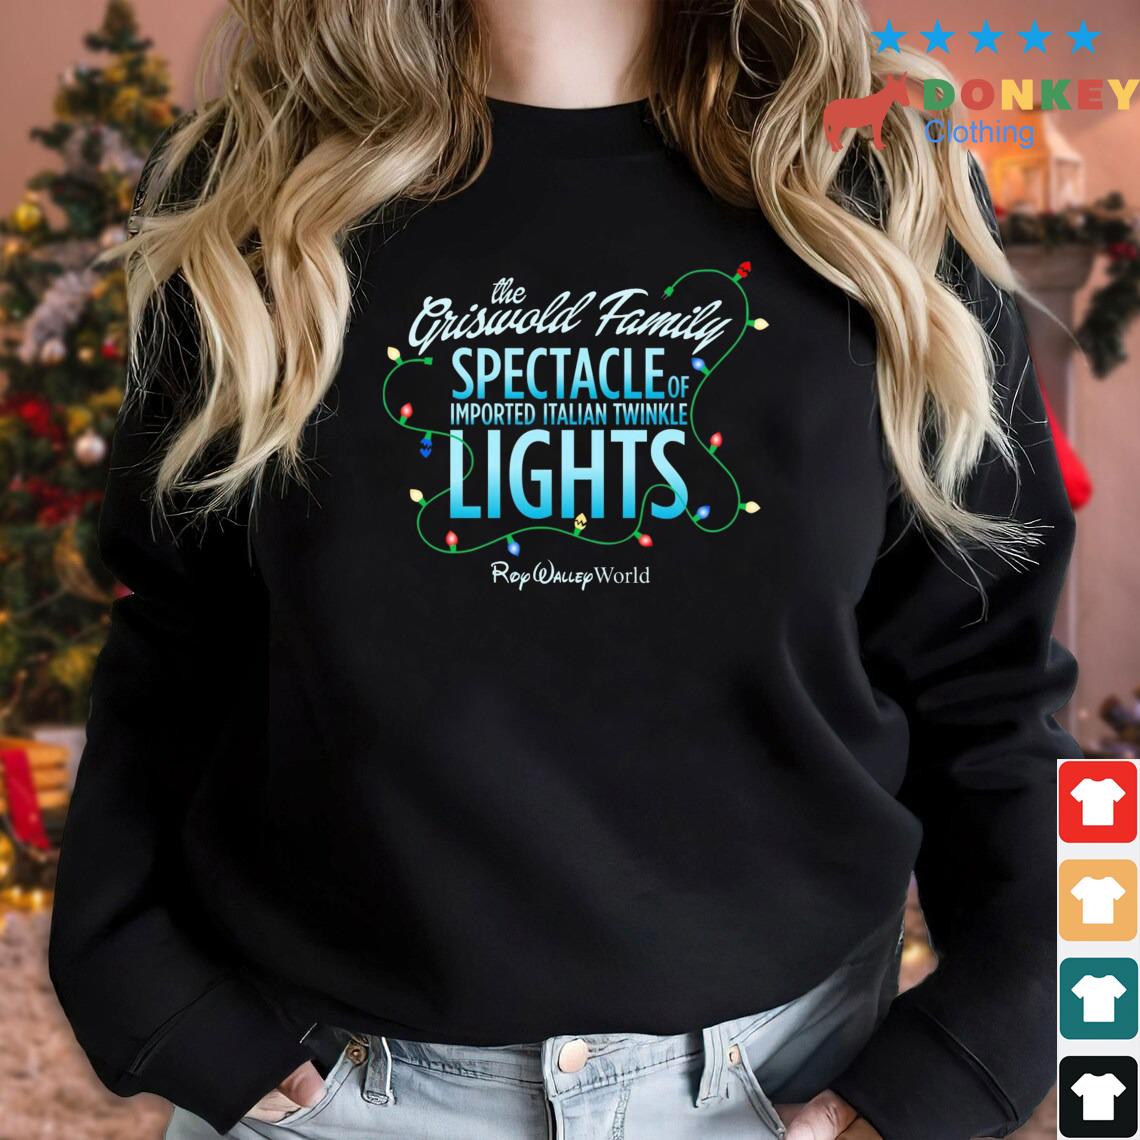 The Griswold Family Spectacle Of Imported Italian Twinkle Lights Rop Wallep World Christmas Sweater